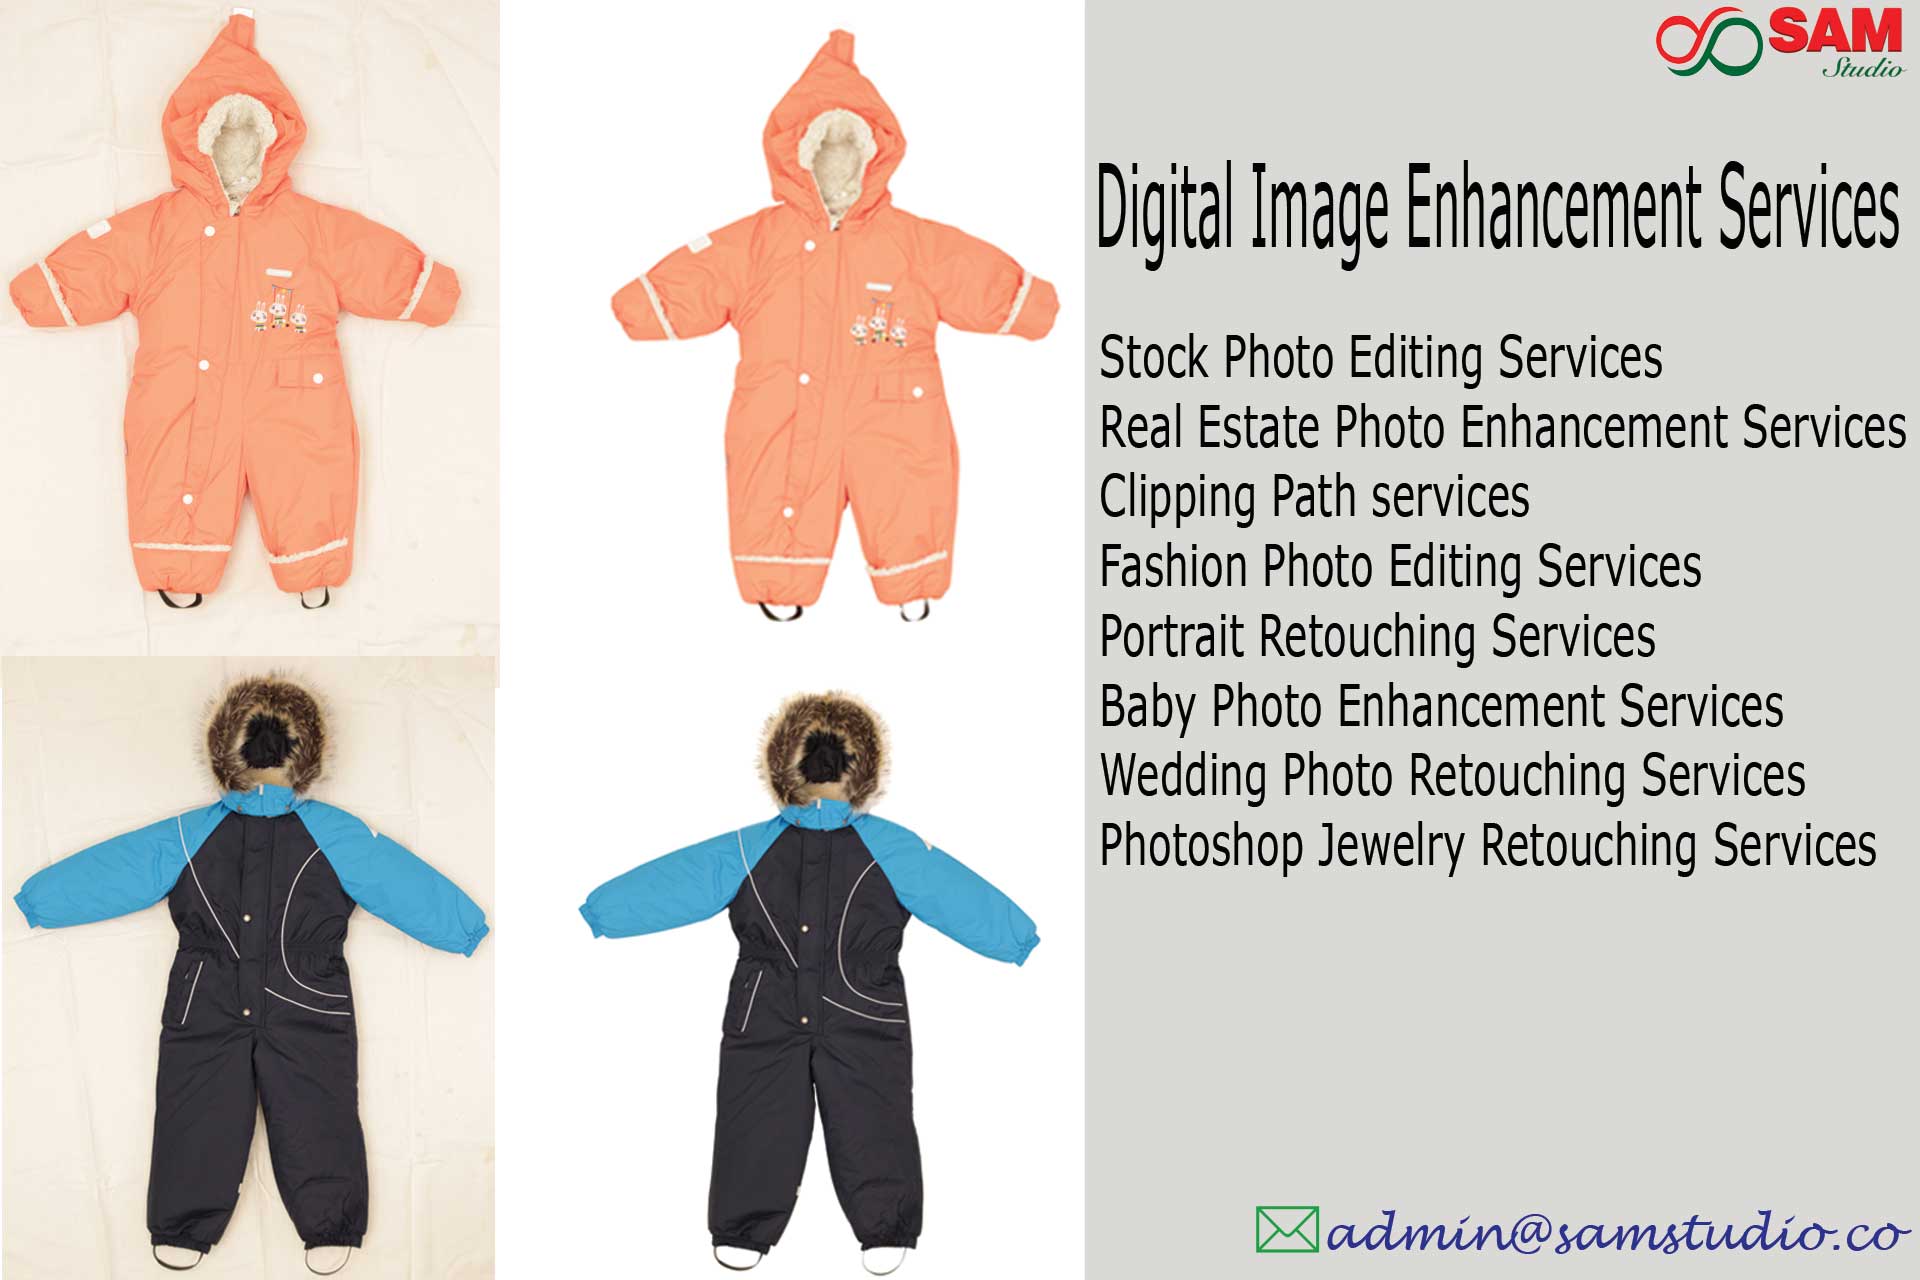 Why Outsourcing Image Editing Services are the best choice for Photographers?